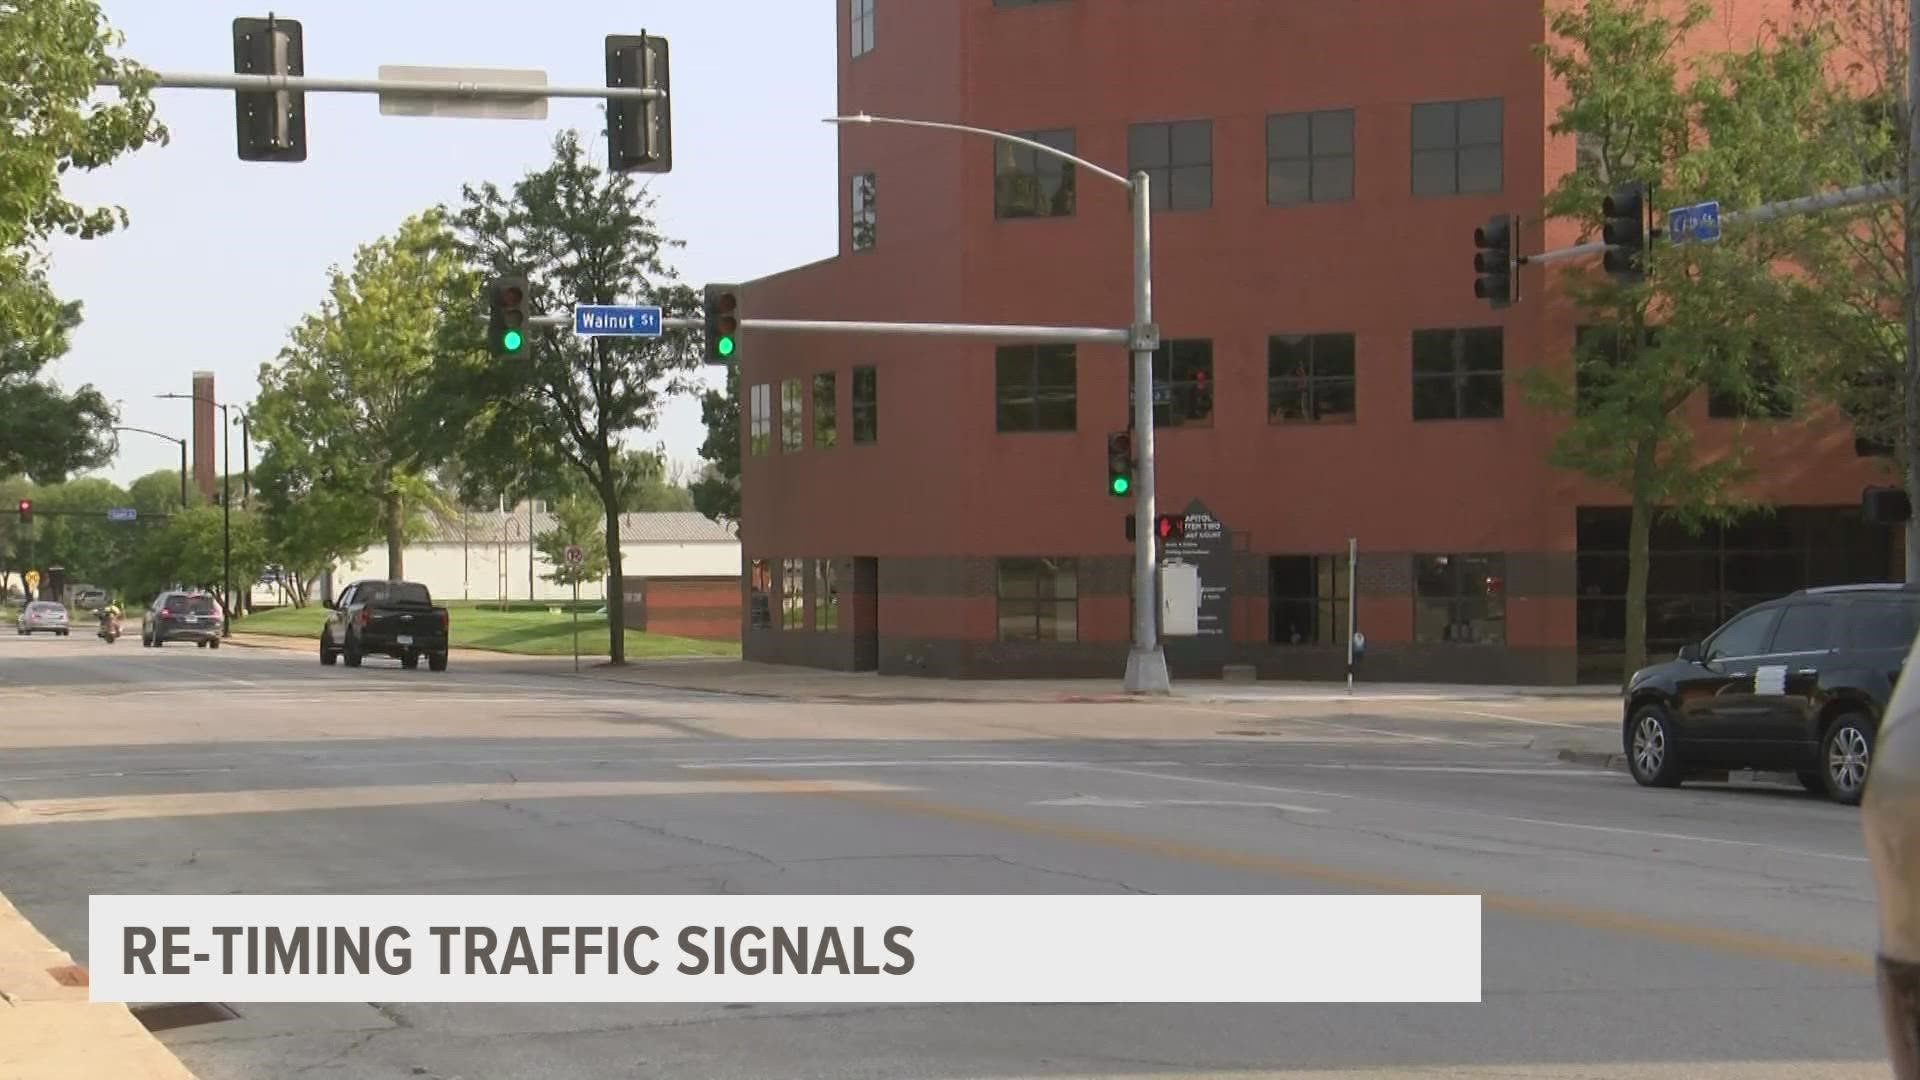 The city is adjusting the timing of more than 425 traffic signals in an effort to improve traffic flow.